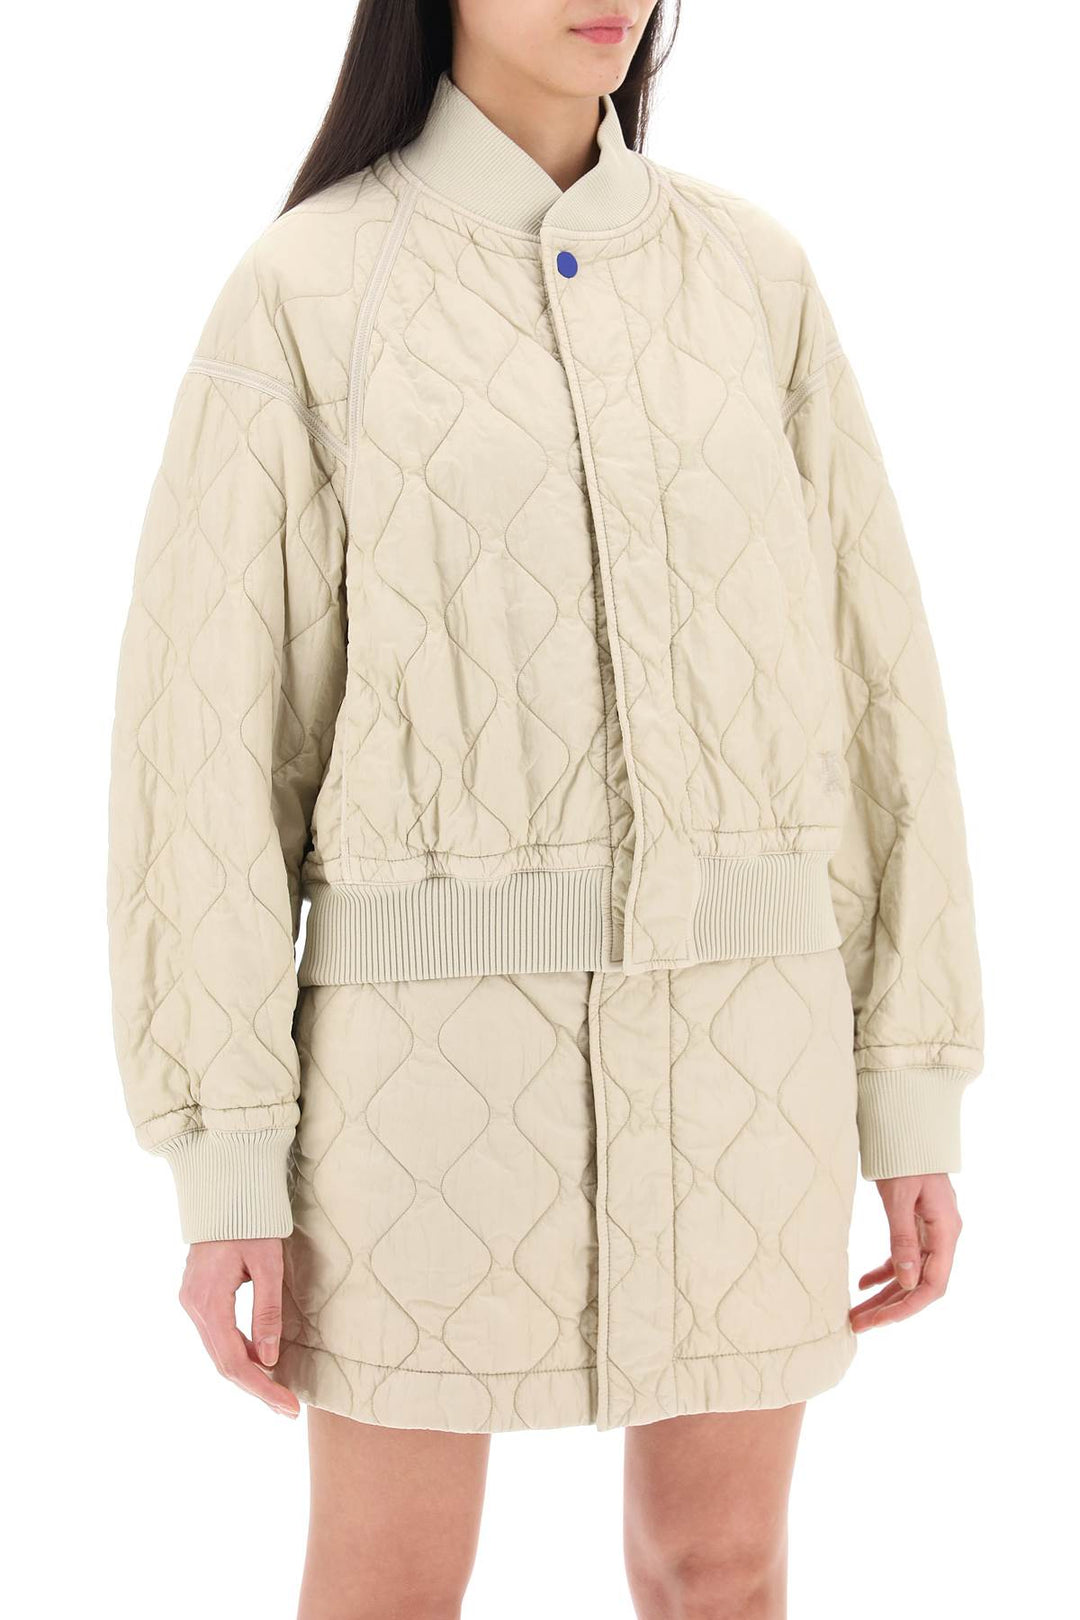 Burberry Quilted Bomber Jacket   Neutro